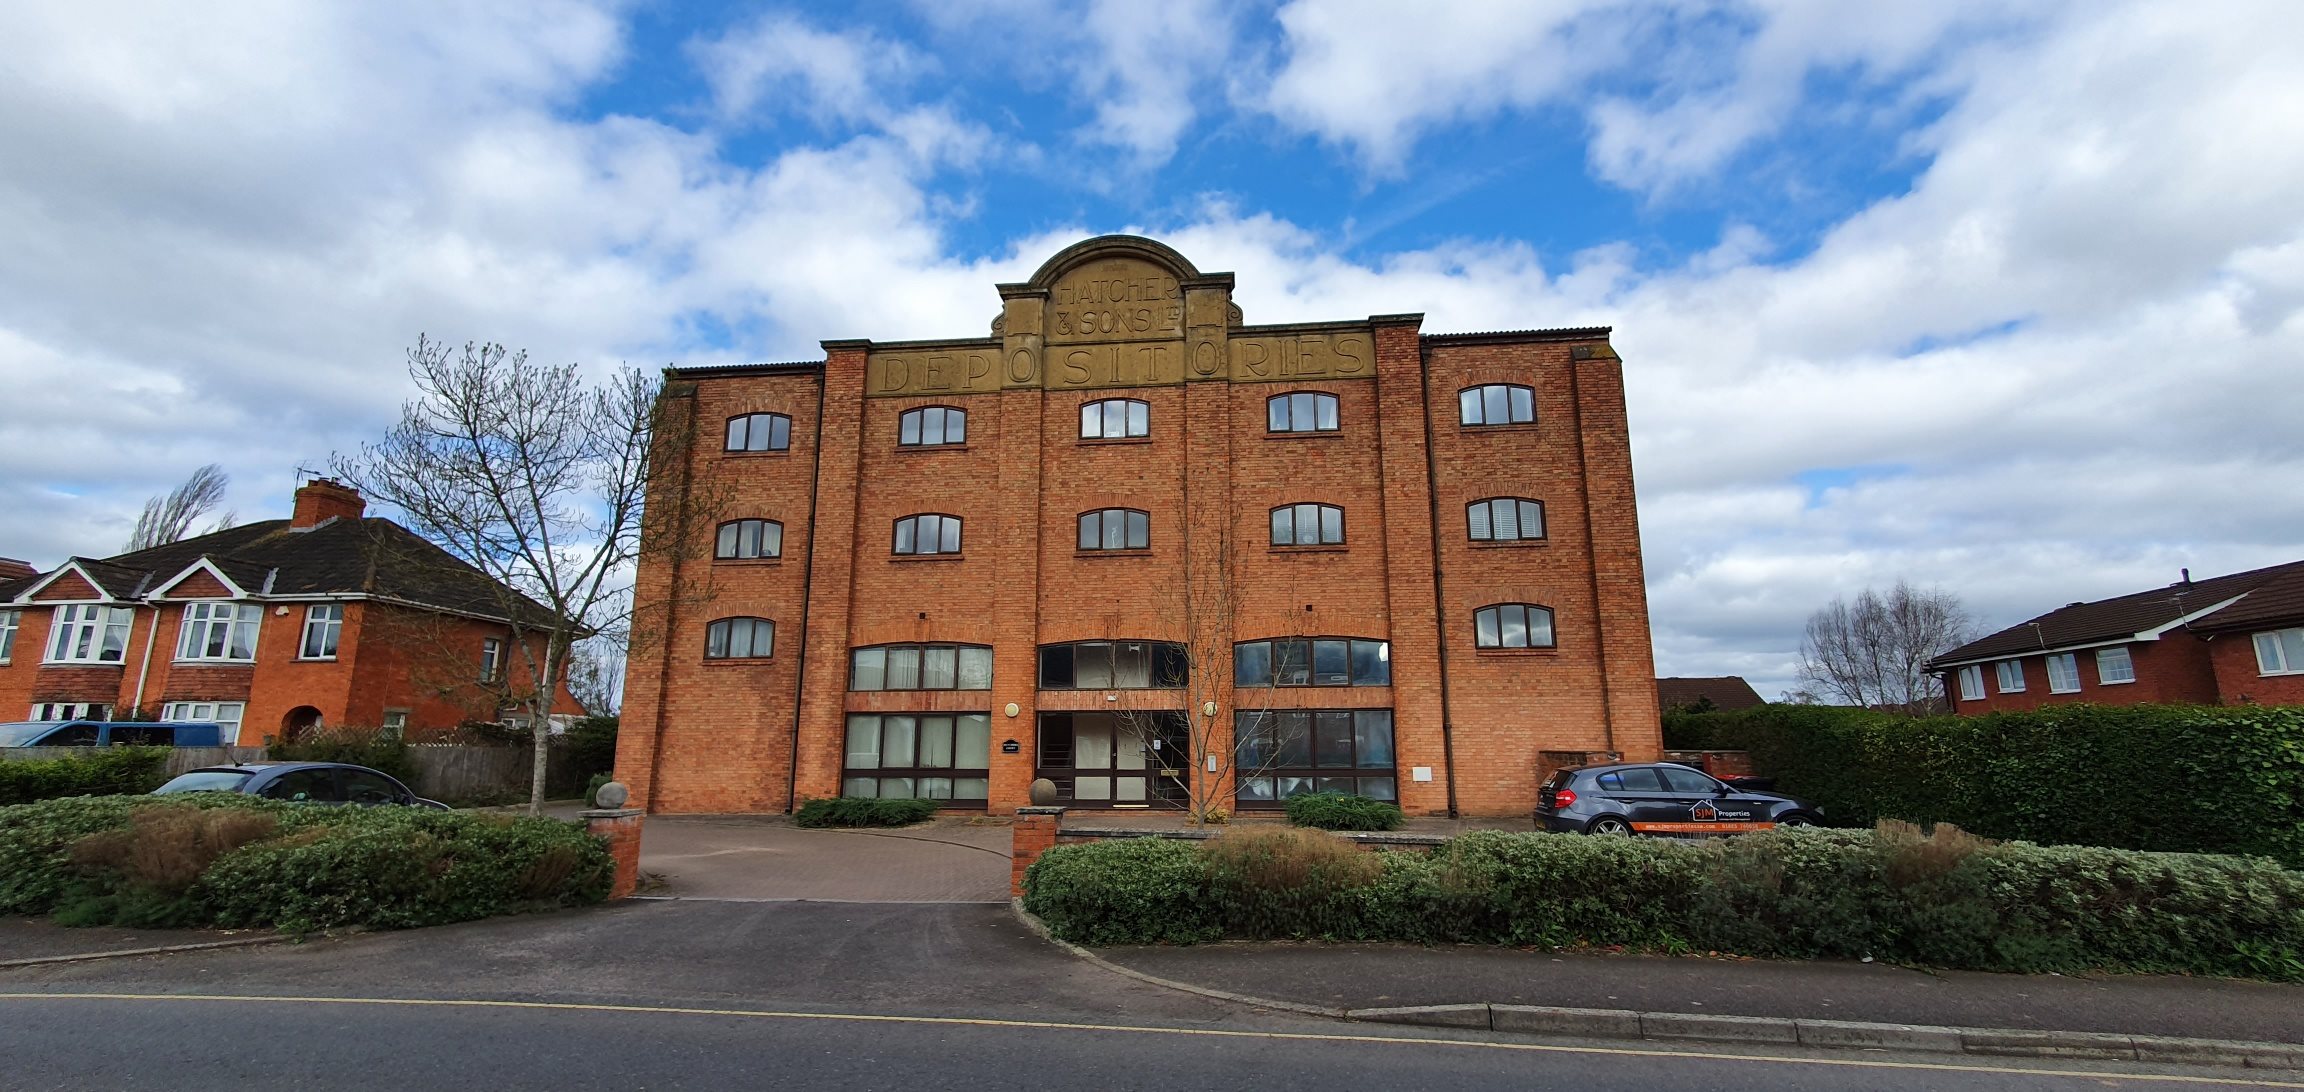 1 bed flat to rent in Hatcher’s Court Kingston Road, Taunton, TA2 